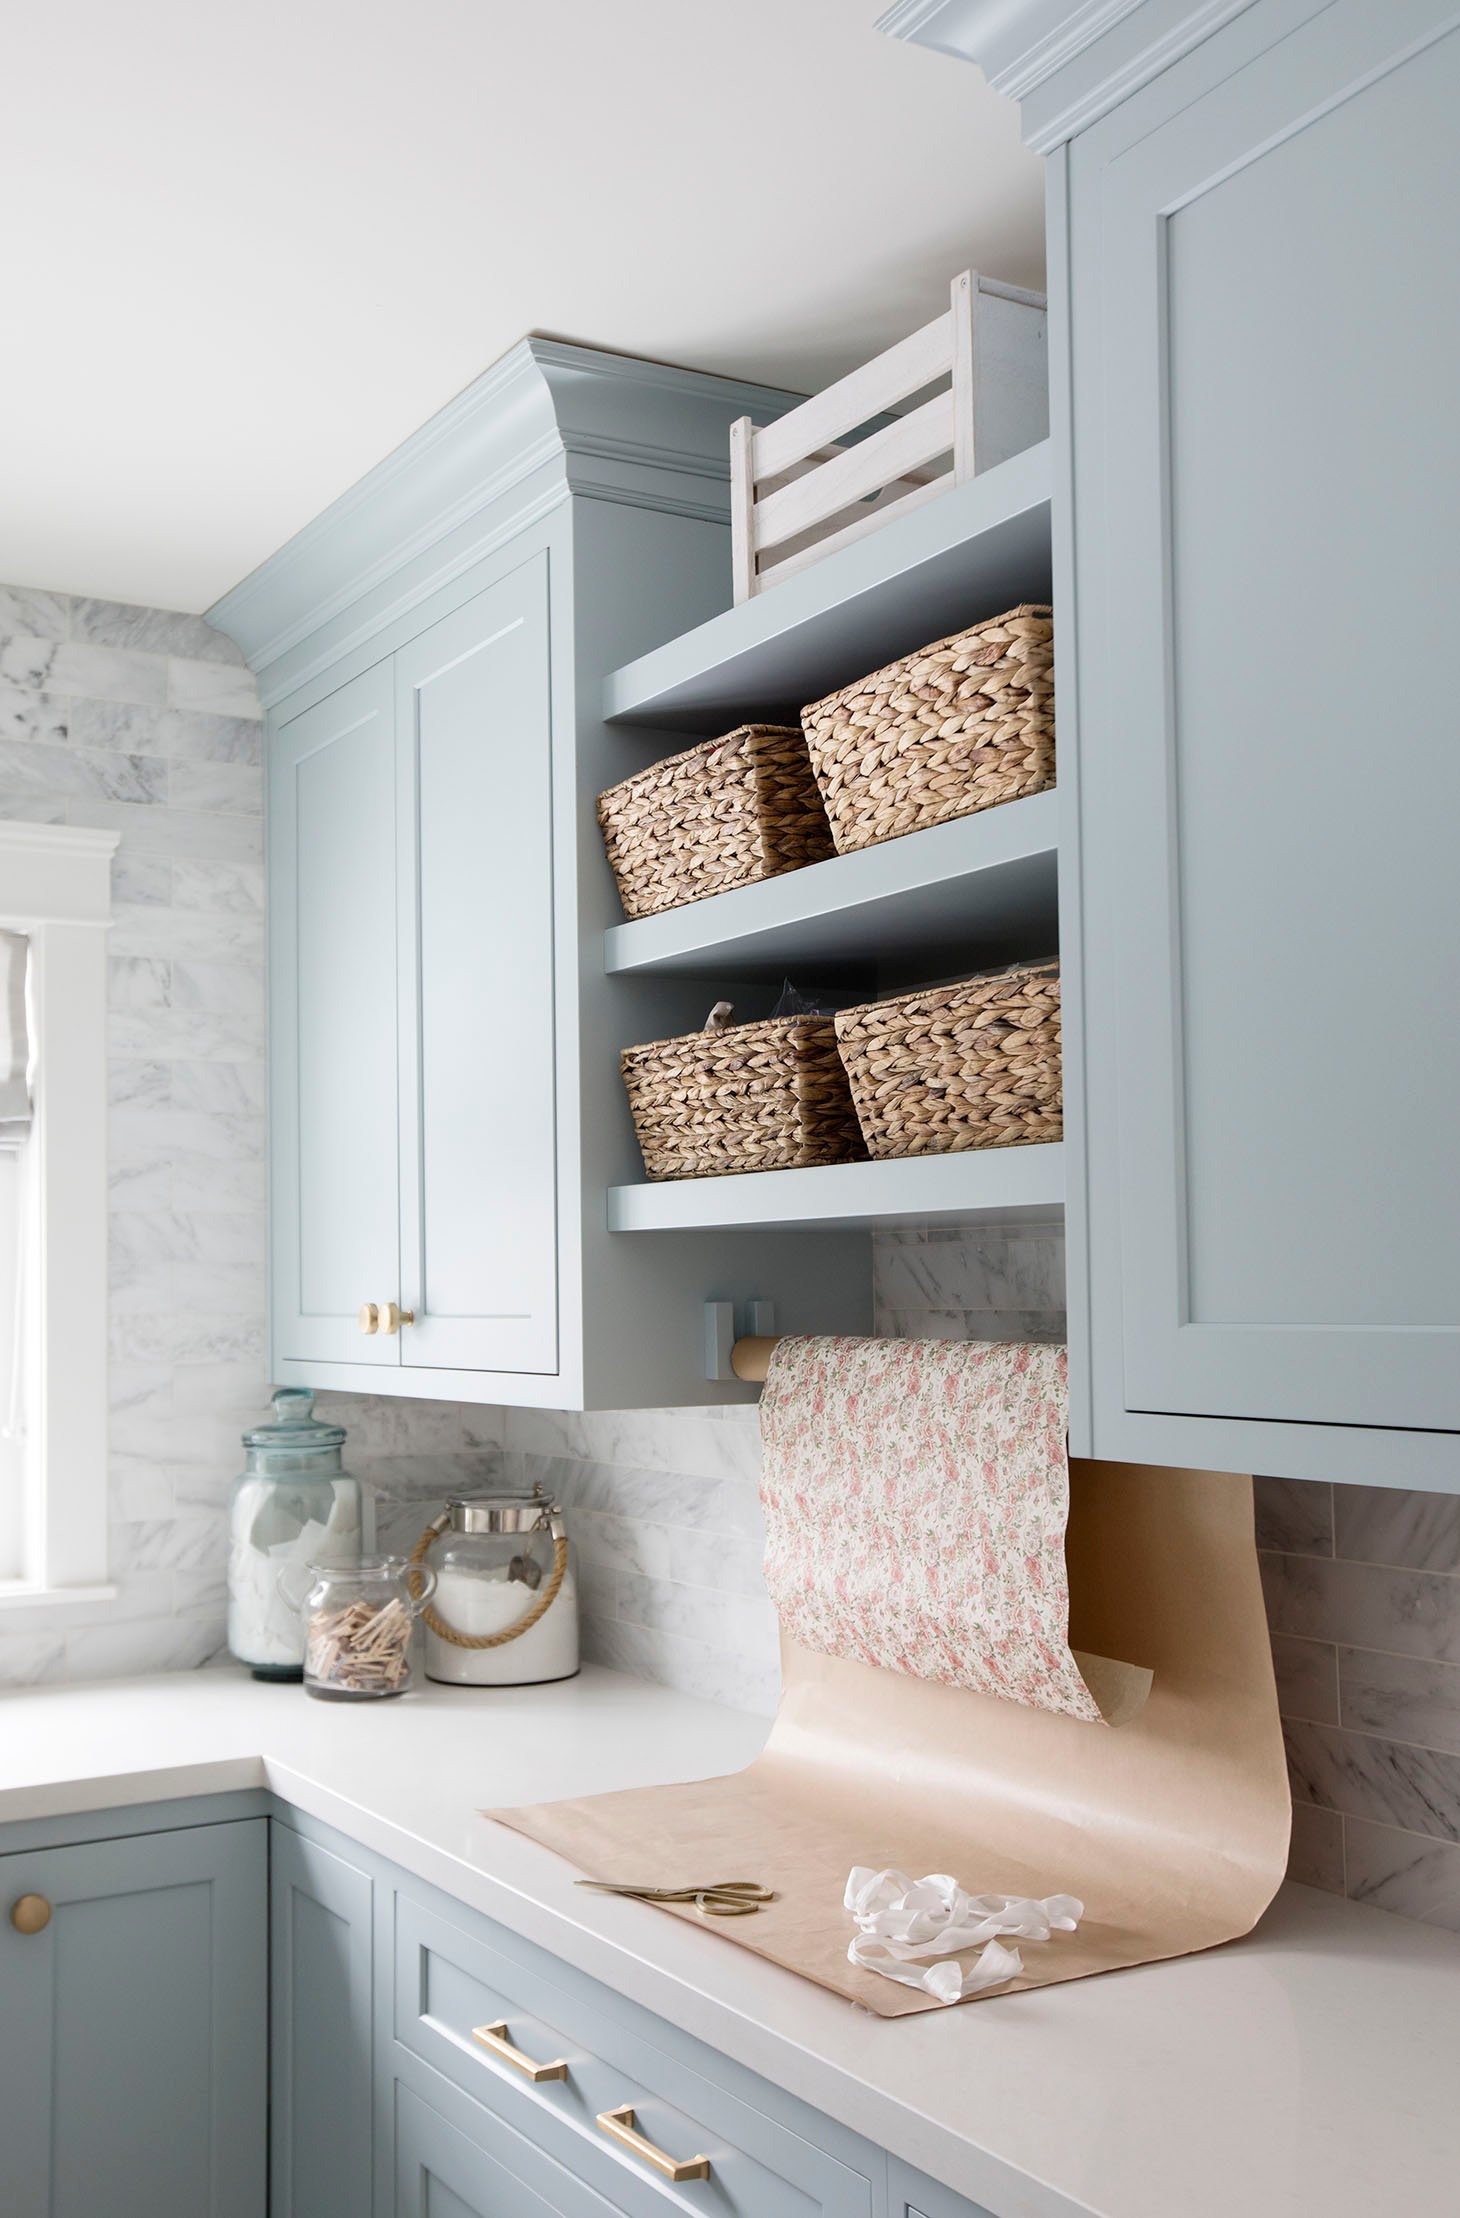 laundry room cabinets painted benjamin moore smoke with rattan baskets on the shelves